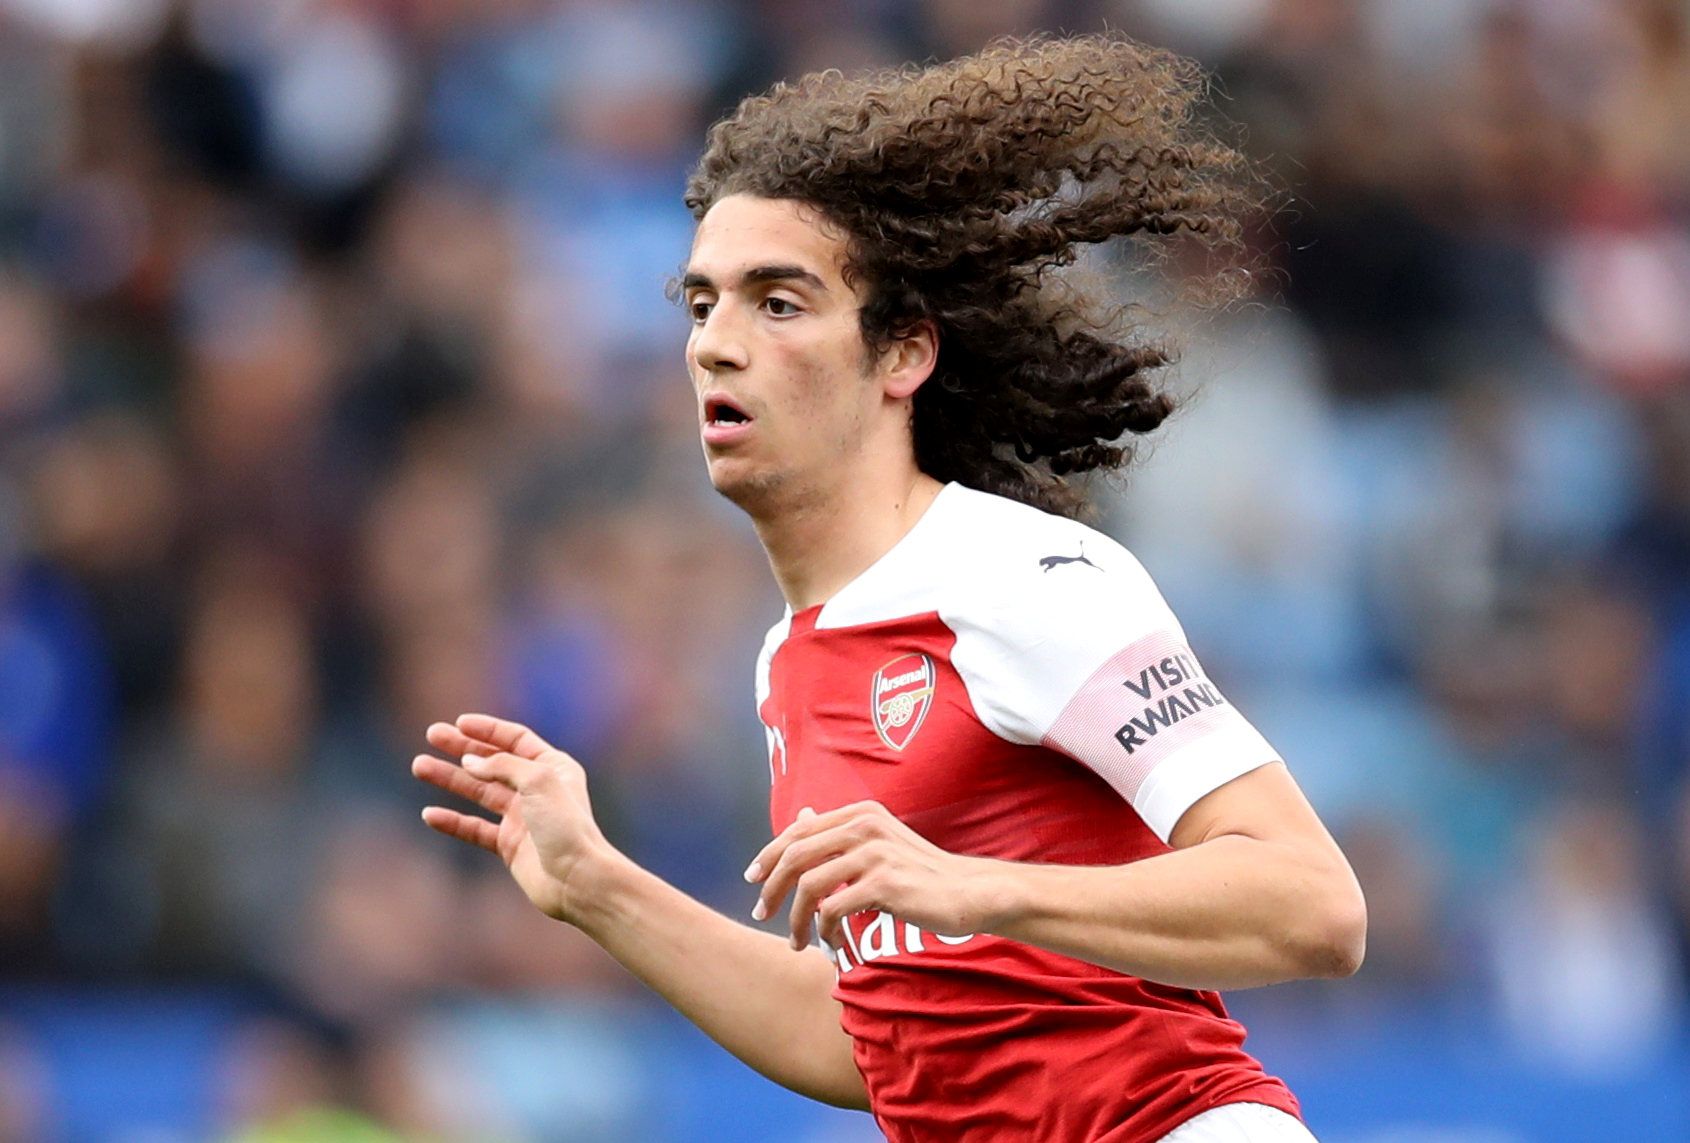 Soccer Football - Premier League - Leicester City v Arsenal - King Power Stadium, Leicester, Britain - April 28, 2019  Arsenal's Matteo Guendouzi         Action Images via Reuters/Carl Recine  EDITORIAL USE ONLY. No use with unauthorized audio, video, data, fixture lists, club/league logos or 